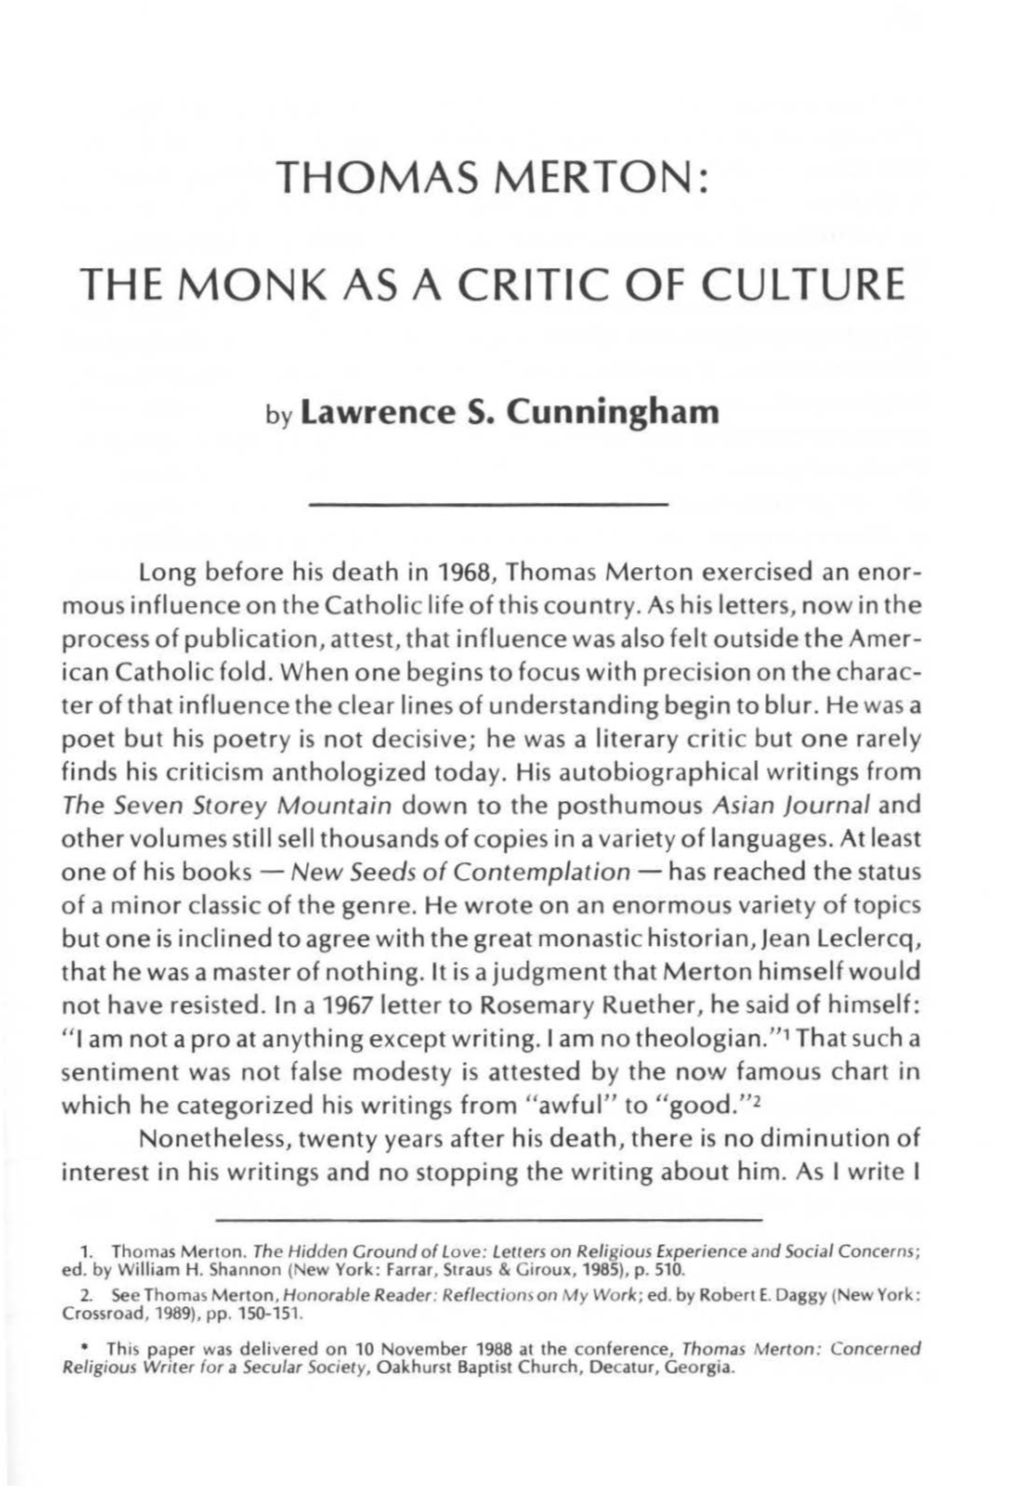 Thomas Merton: the Monk As a Critic of Culture